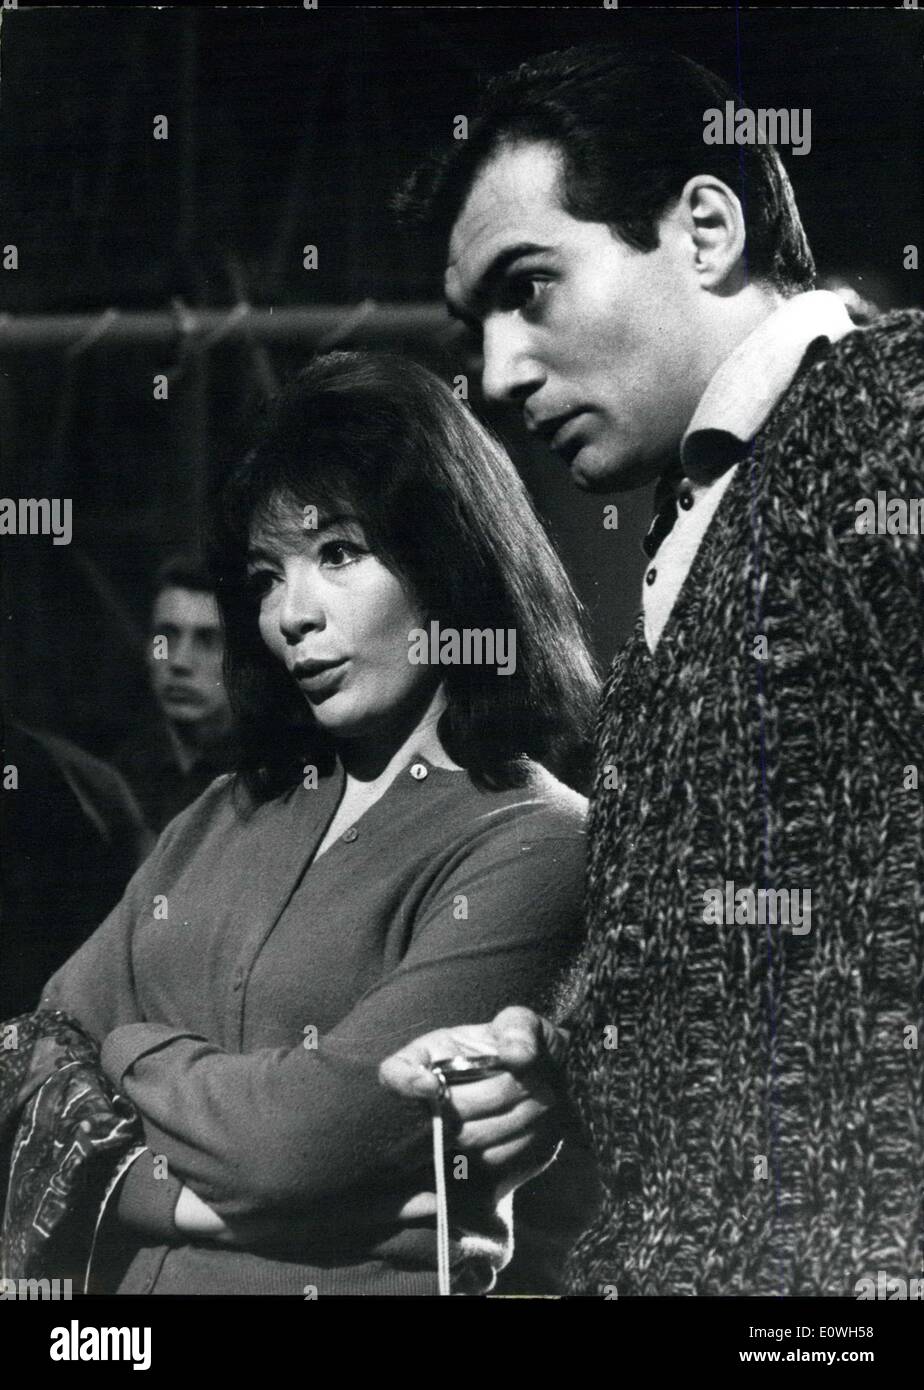 Dec. 13, 1962 - Achanson -show with Juliette Greco (Juliette Greco) is produced at the present by the TV - Regisseur Michaels Pfleghar (Michael Pfleghar) in the Bavaira - Ateliers at Munich. A short time ago Juliette Greco, one of the most famous French diseuses, also was to see during the TV-set ''Lieben Sie show'' (''Do you love show ...?). Also produced by Michael pfleghar. photo shows Juliette Greco and Michael Pfleghar during the sample of work in the TV - Studio in Munich. Stock Photo